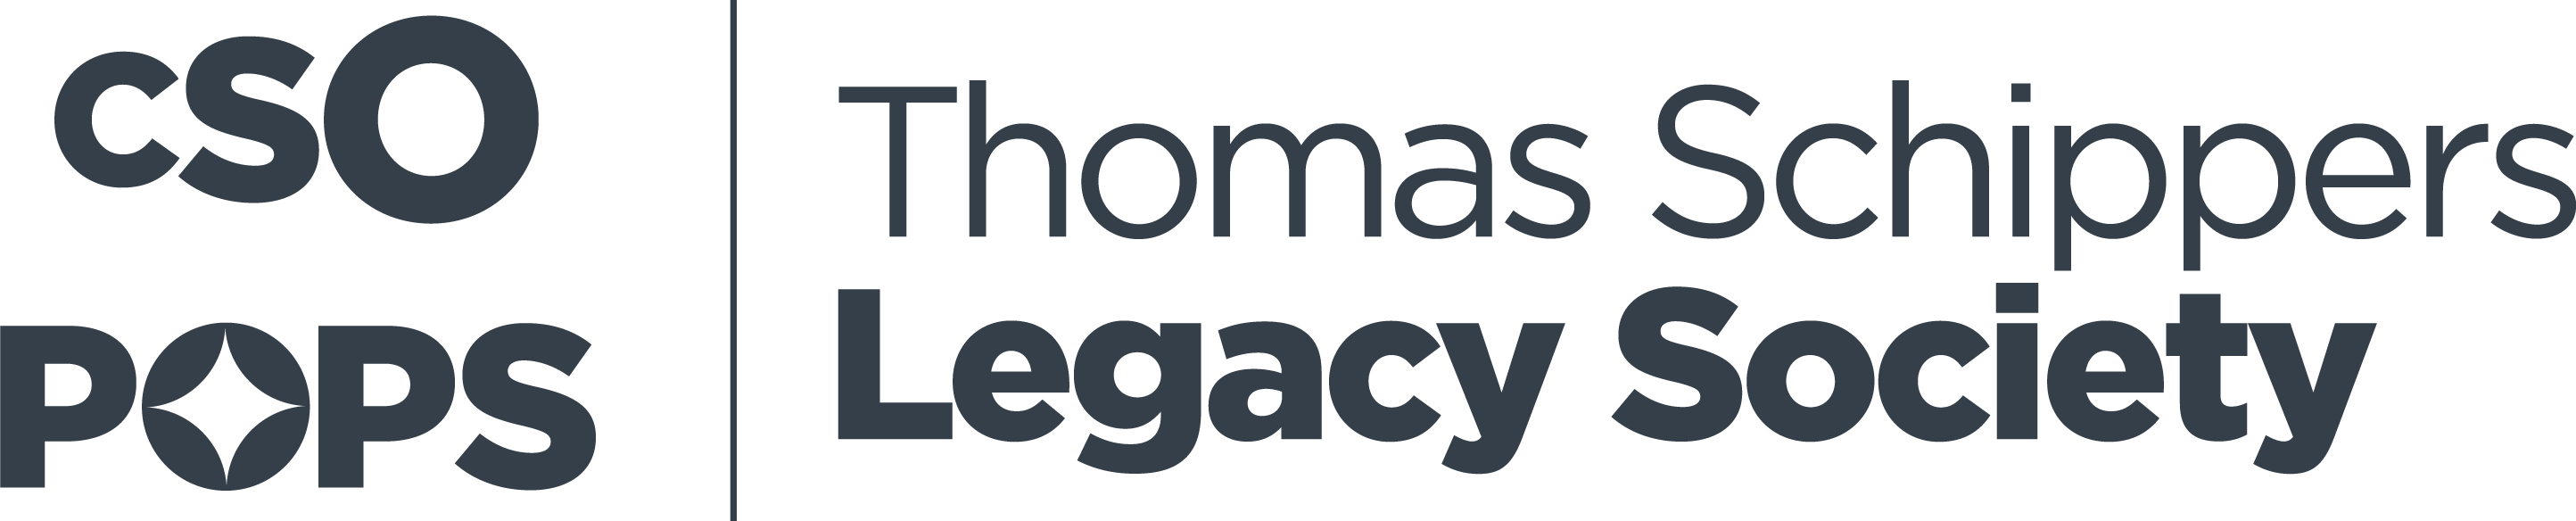 Thomas Schippers Legacy Society